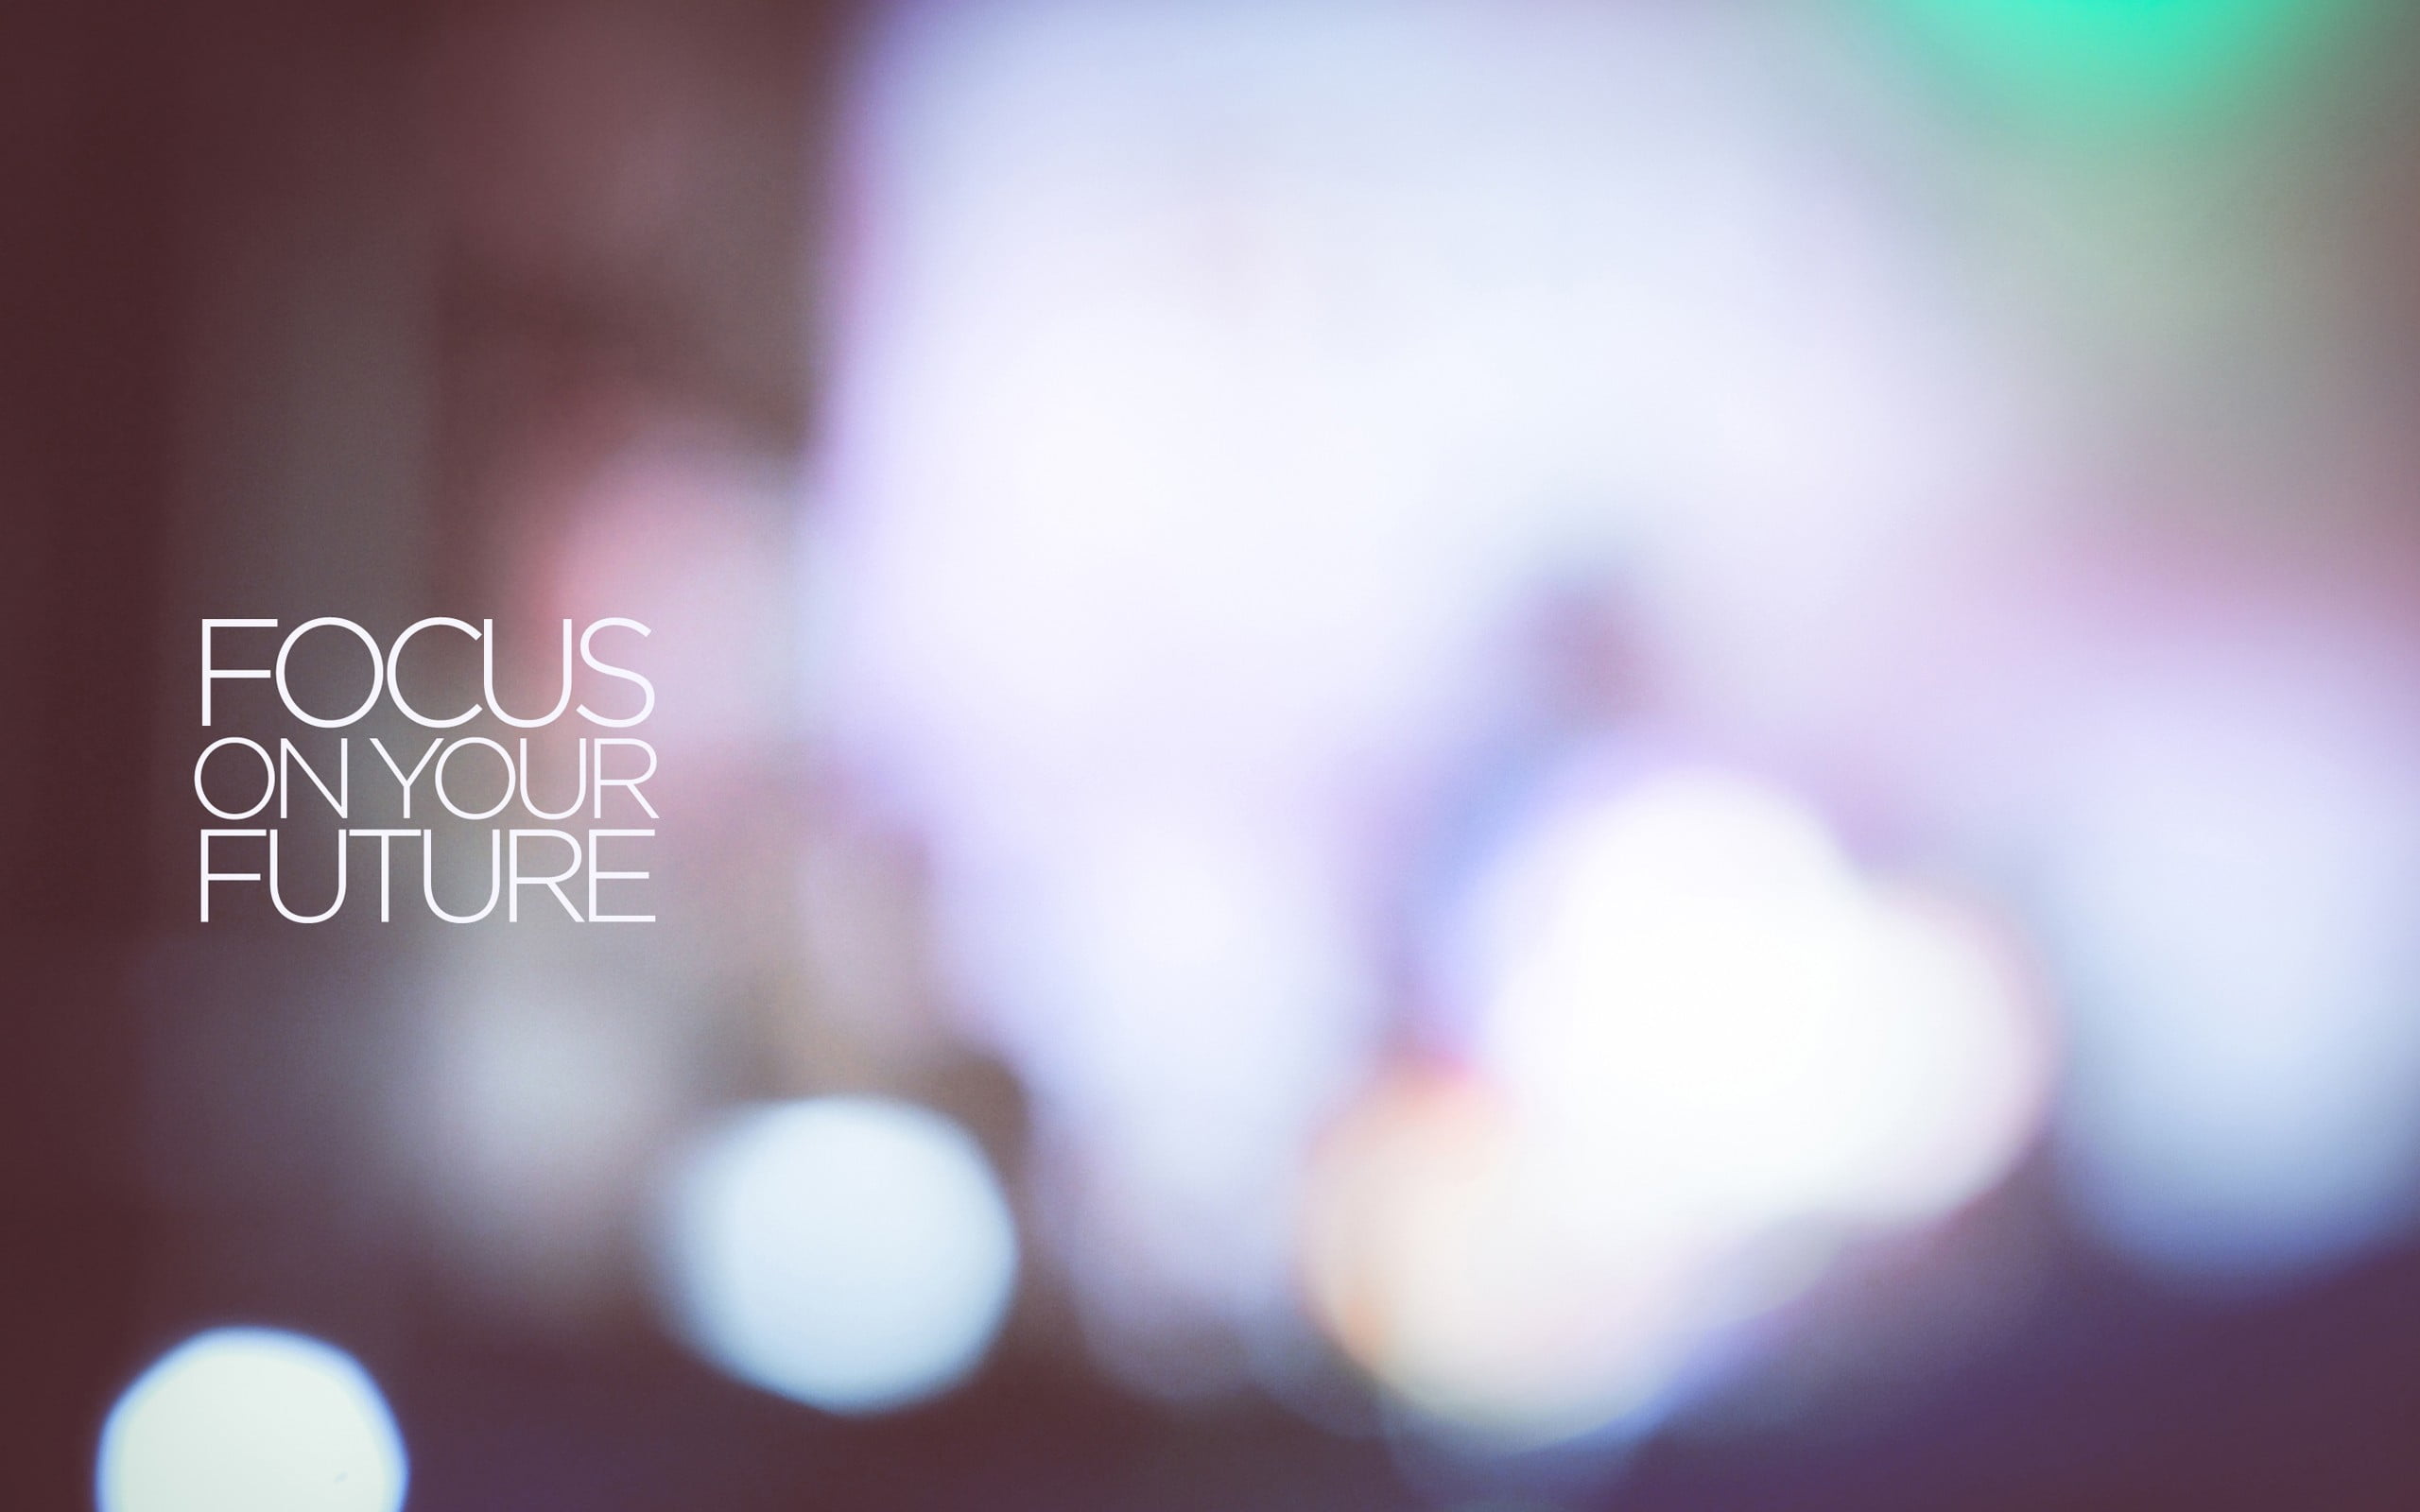 focus on your future text overlay, bokeh photography with focus on your future text overlay